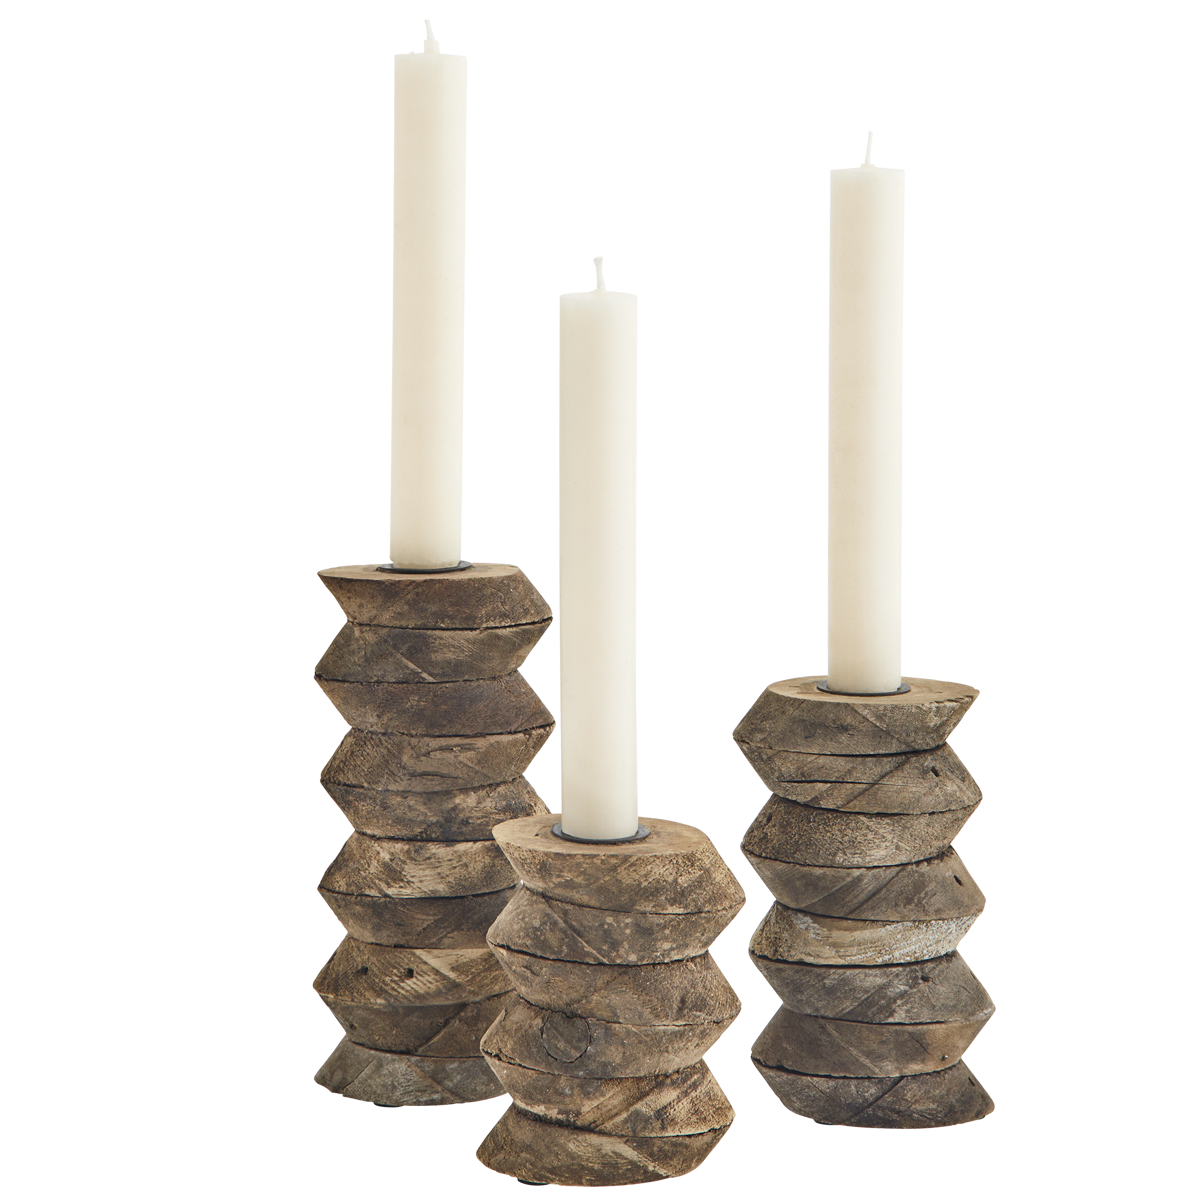 Recycled wooden candle holders